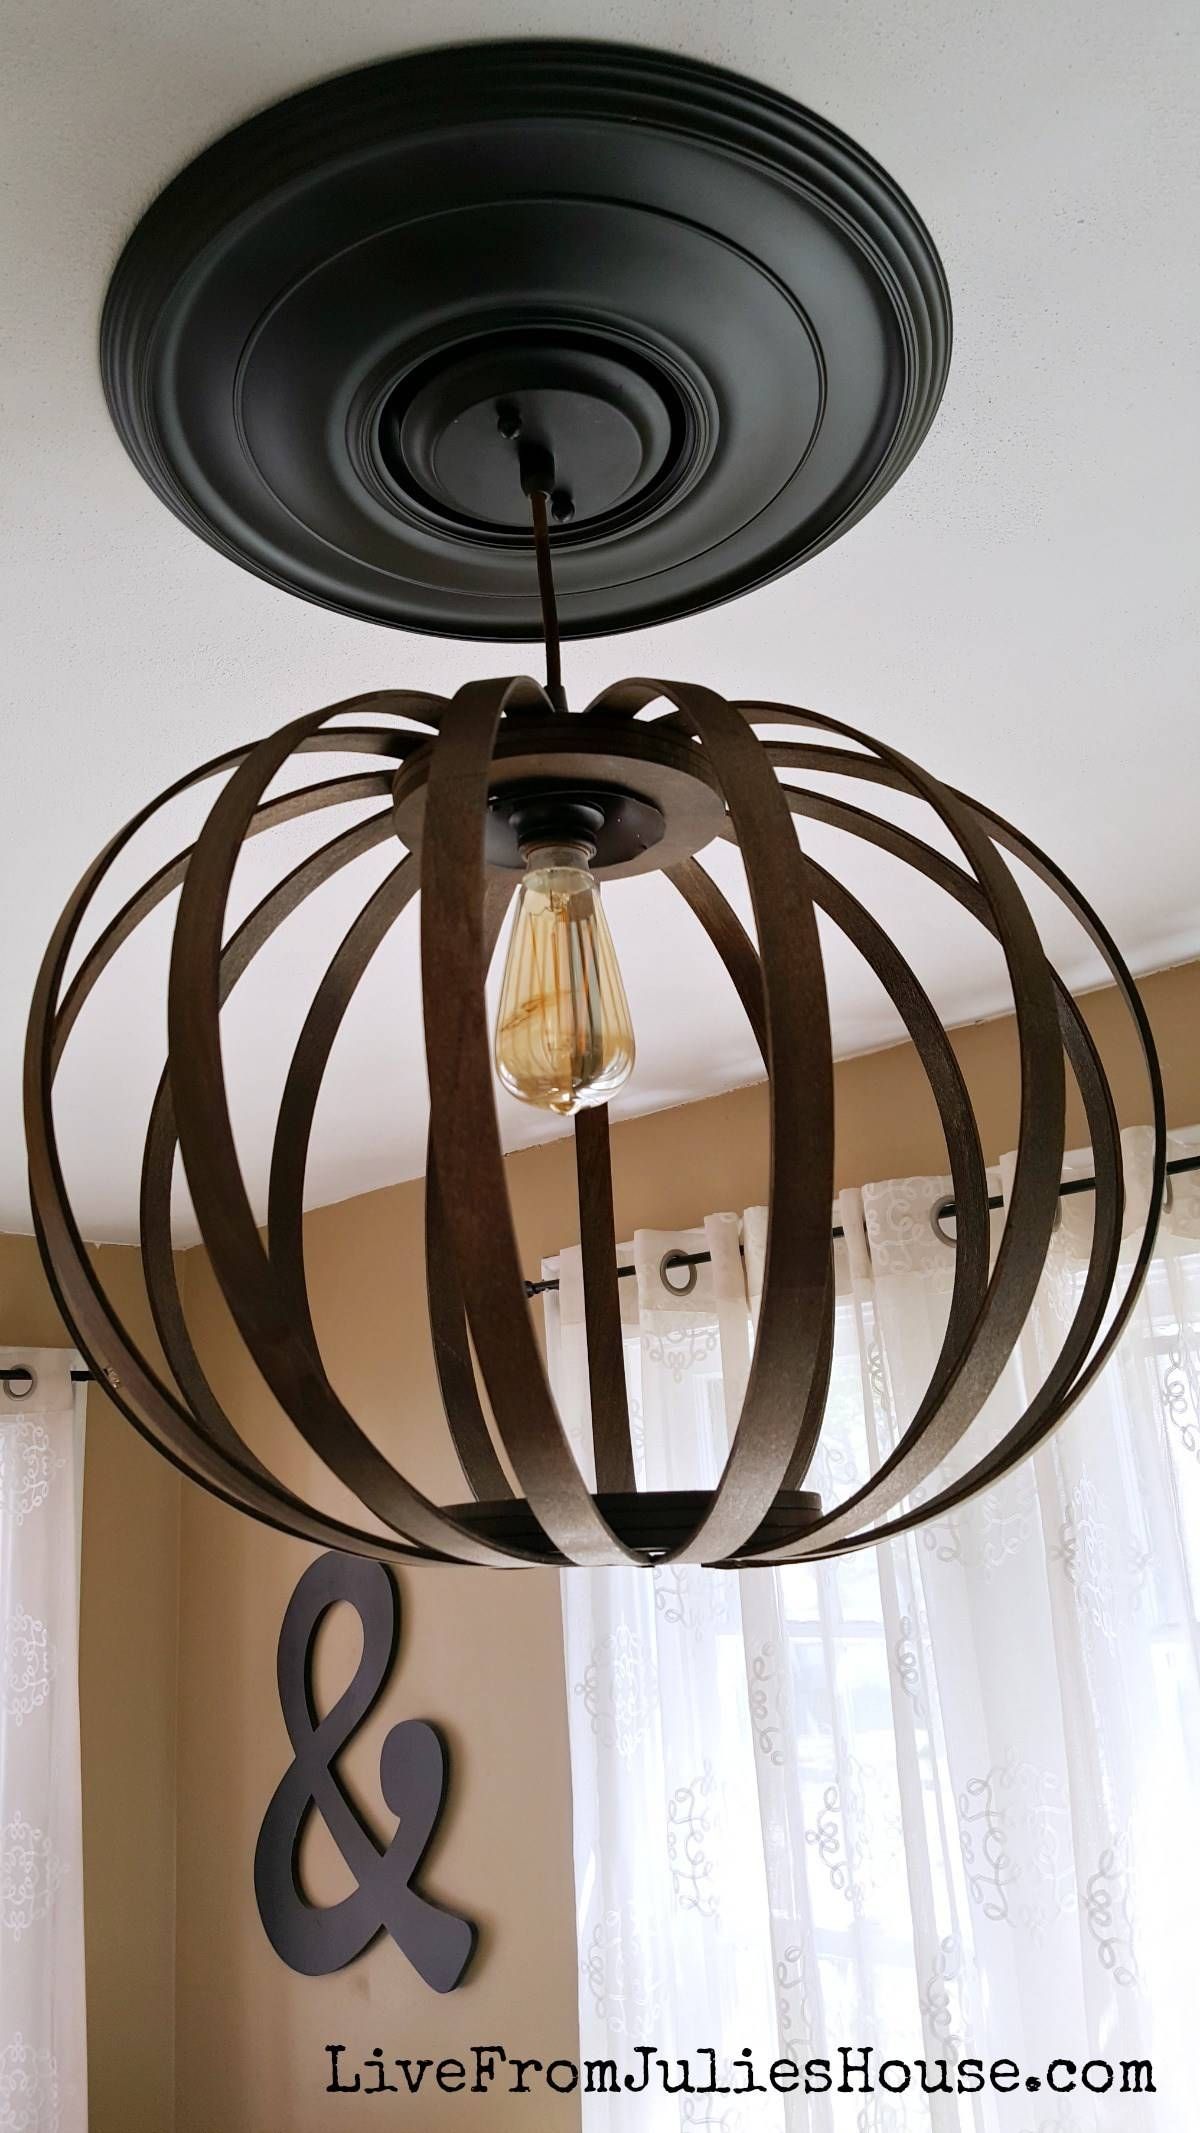 West Elm Diy Bentwood Pendant Debacle – Live From Julie's House For Bent Wood Pendant Lights (View 13 of 15)